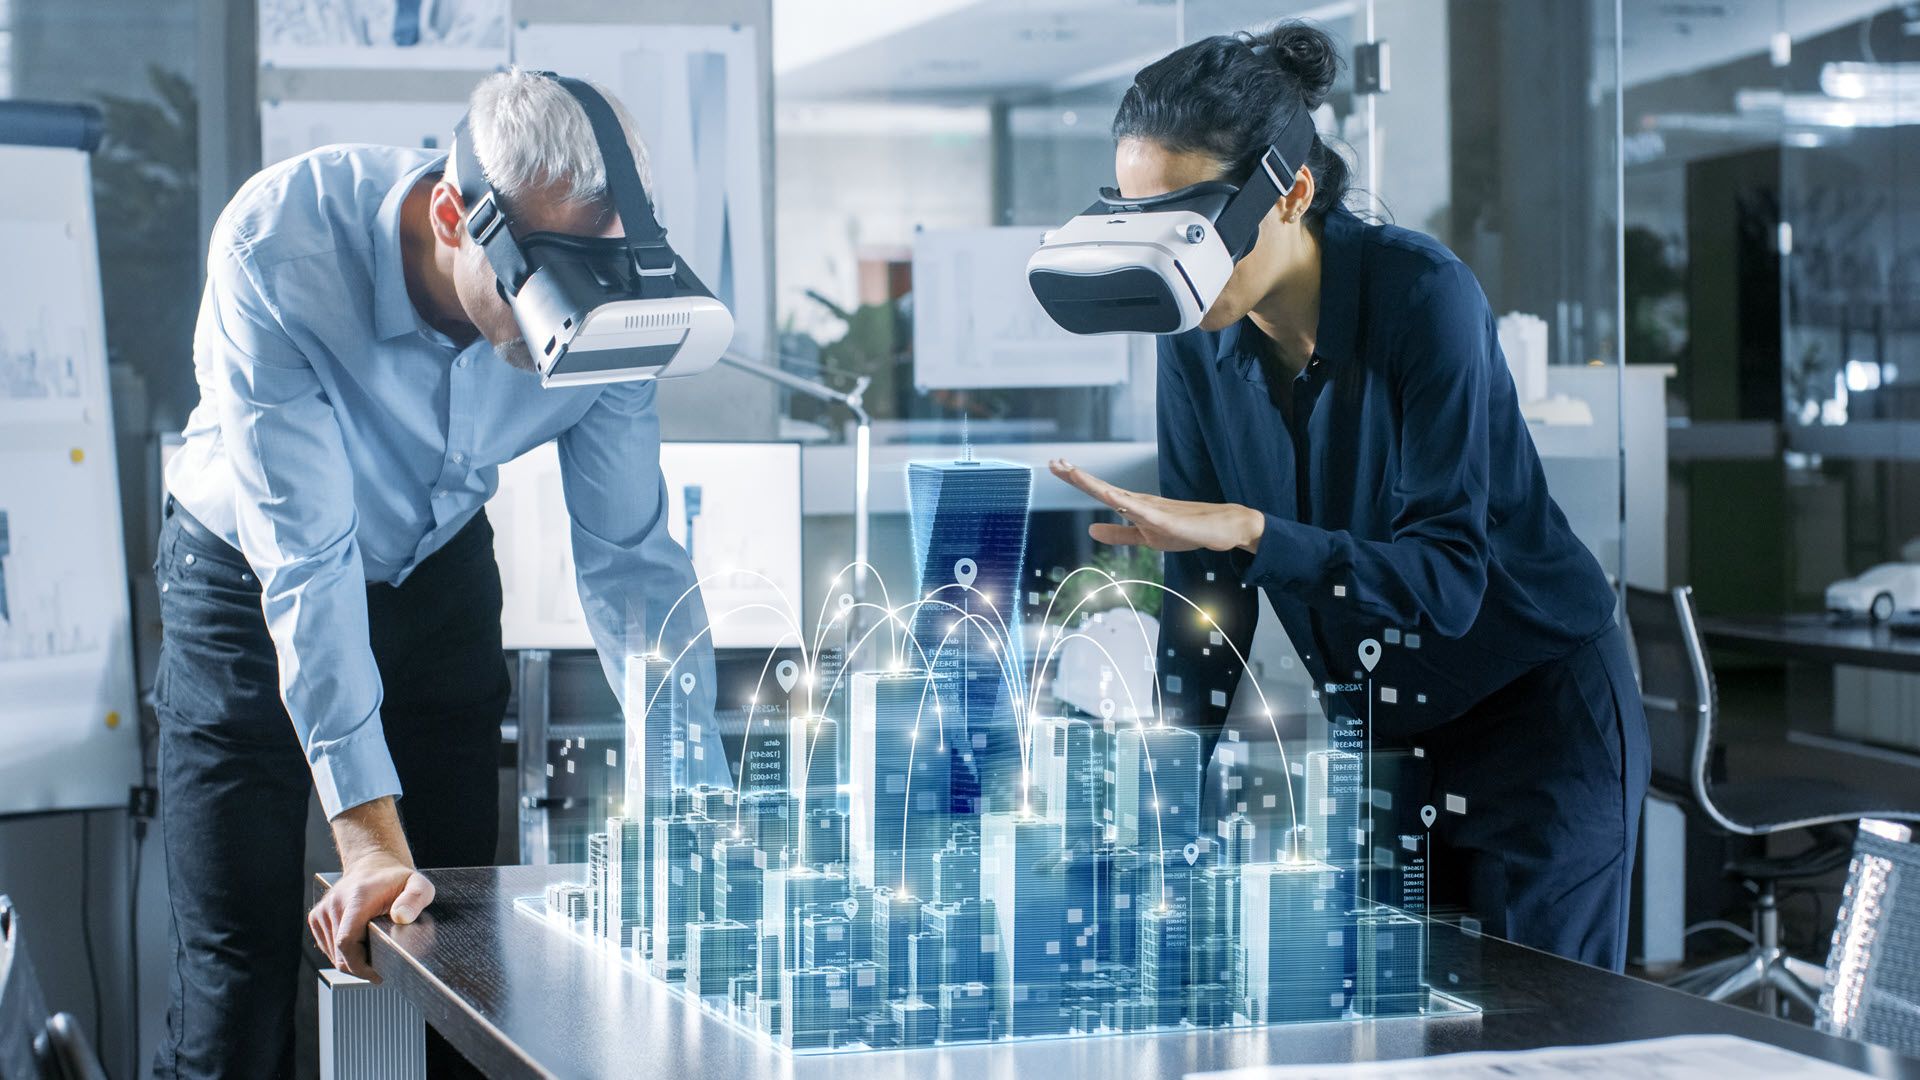 Two people in VR sets staring at an virtual architecture schematic of a city.